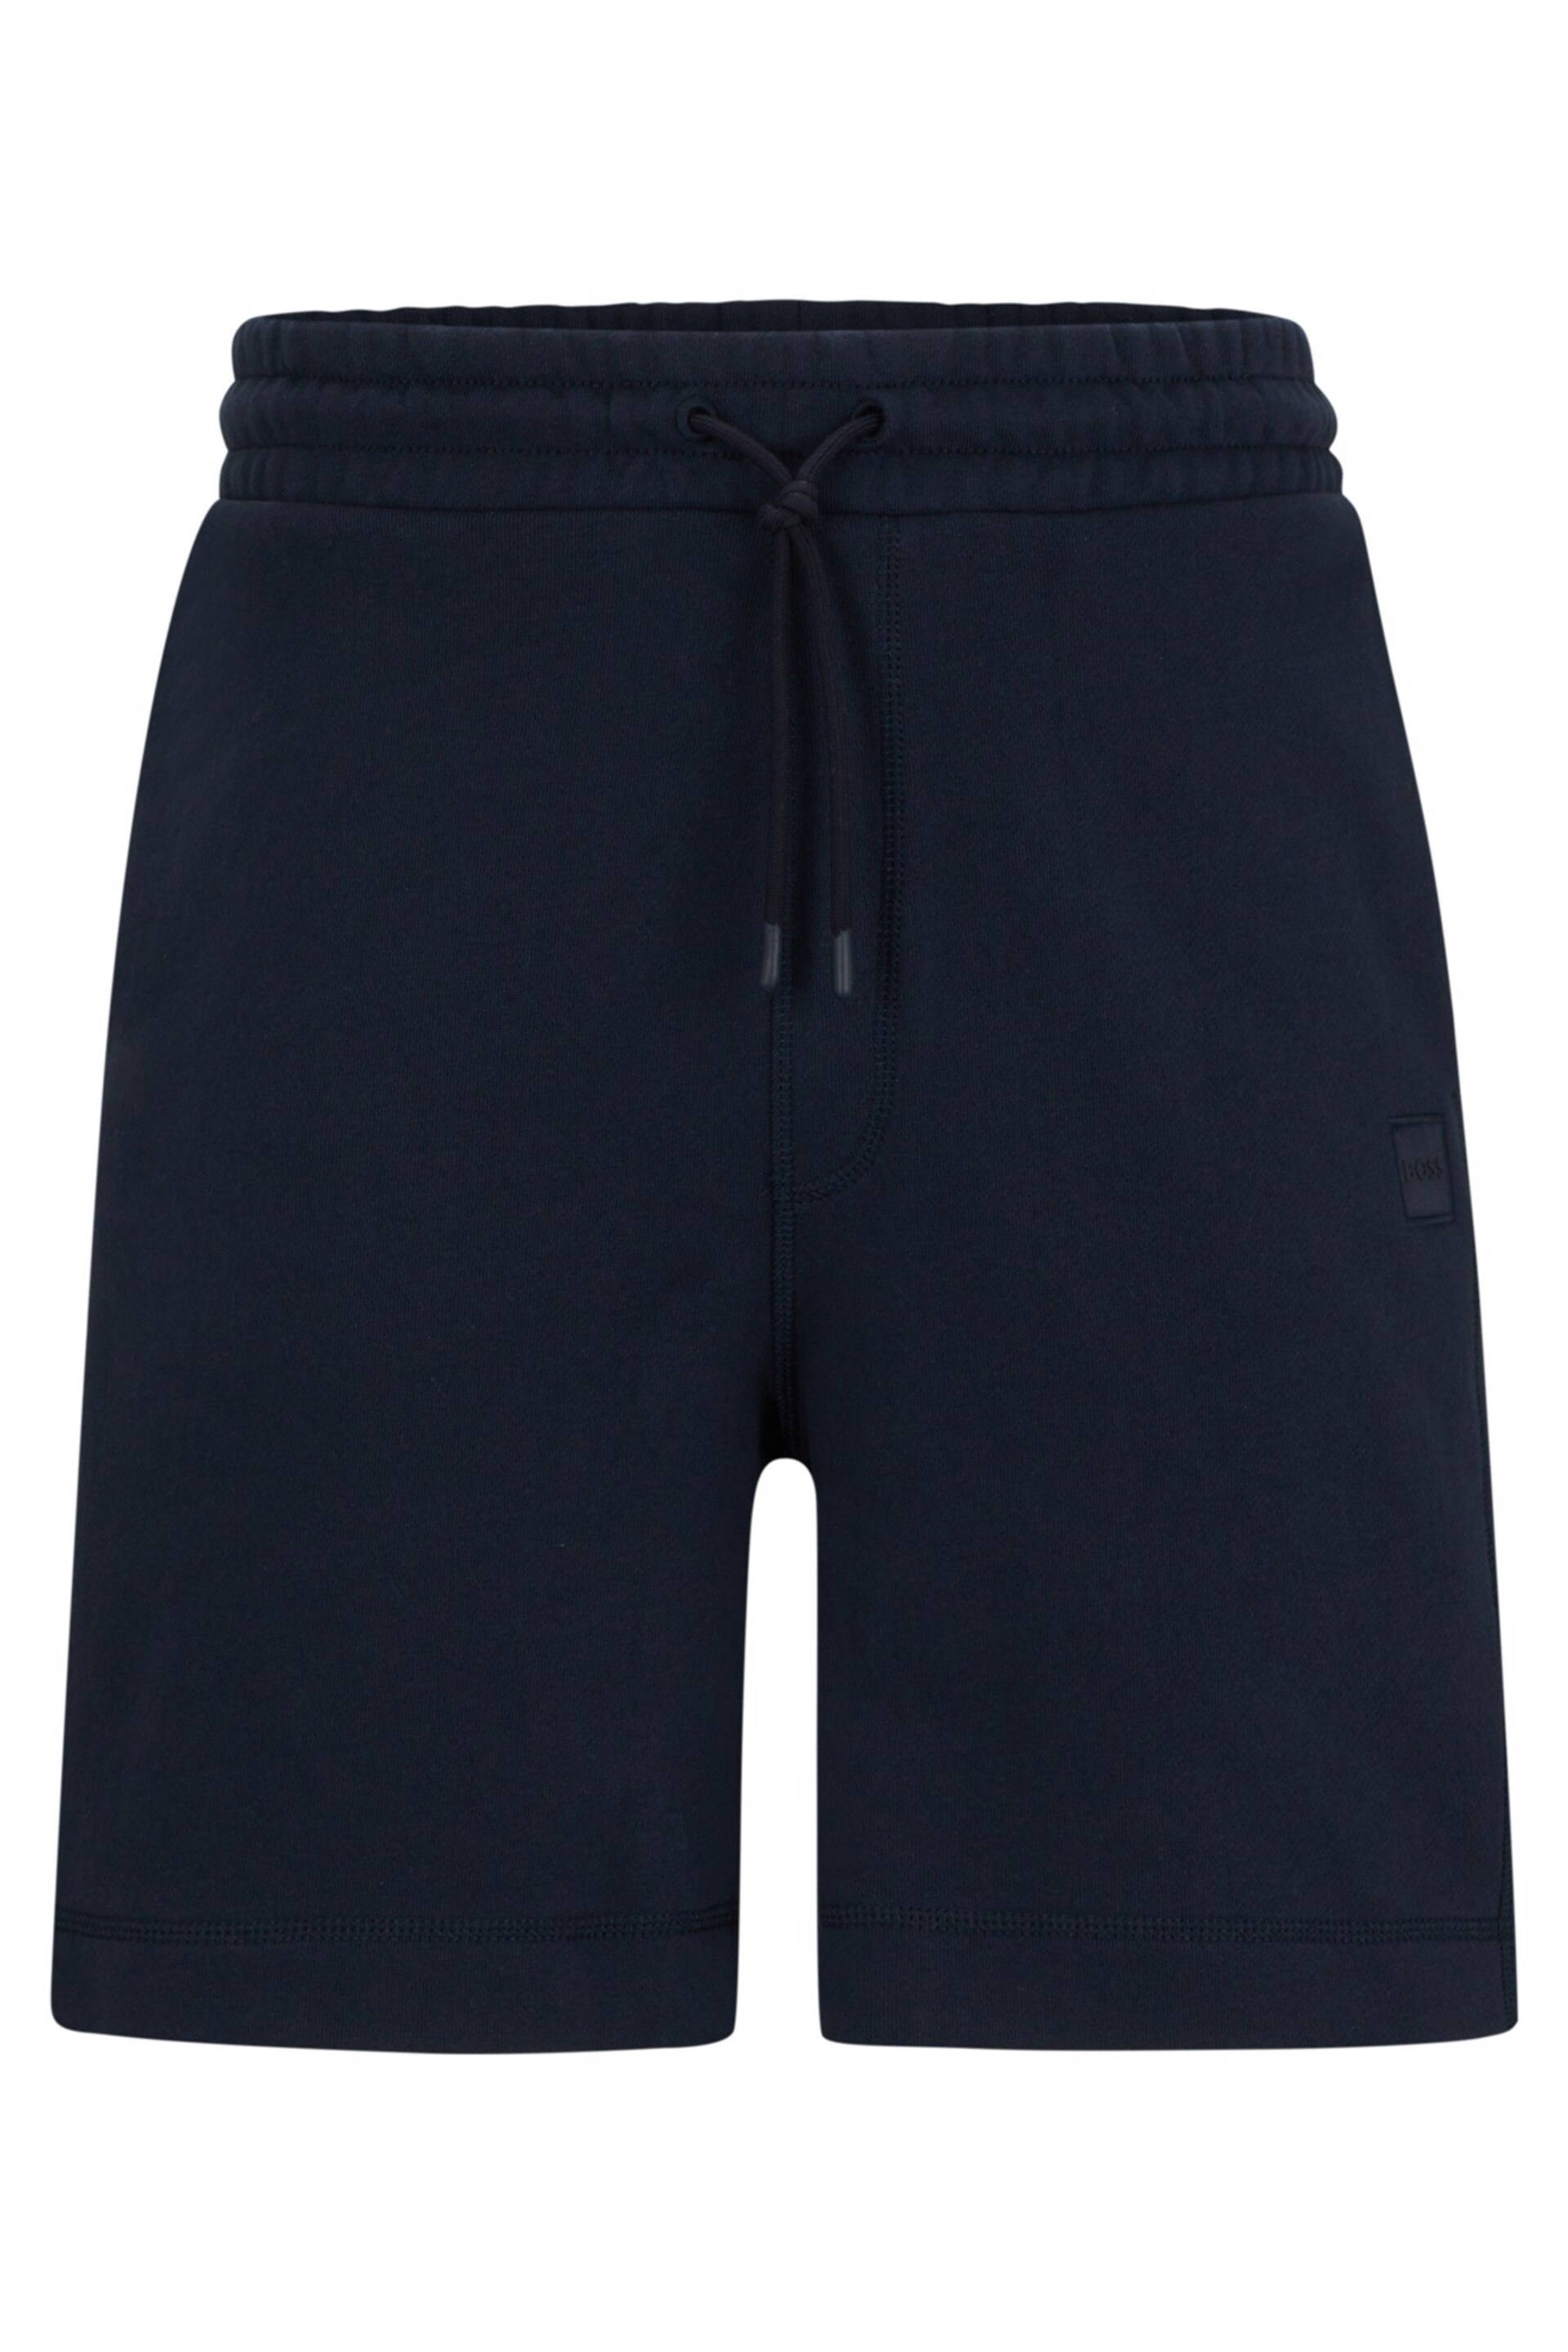 BOSS Blue Cotton-Terry Regular-Fit Shorts With Logo Badge - Image 5 of 6